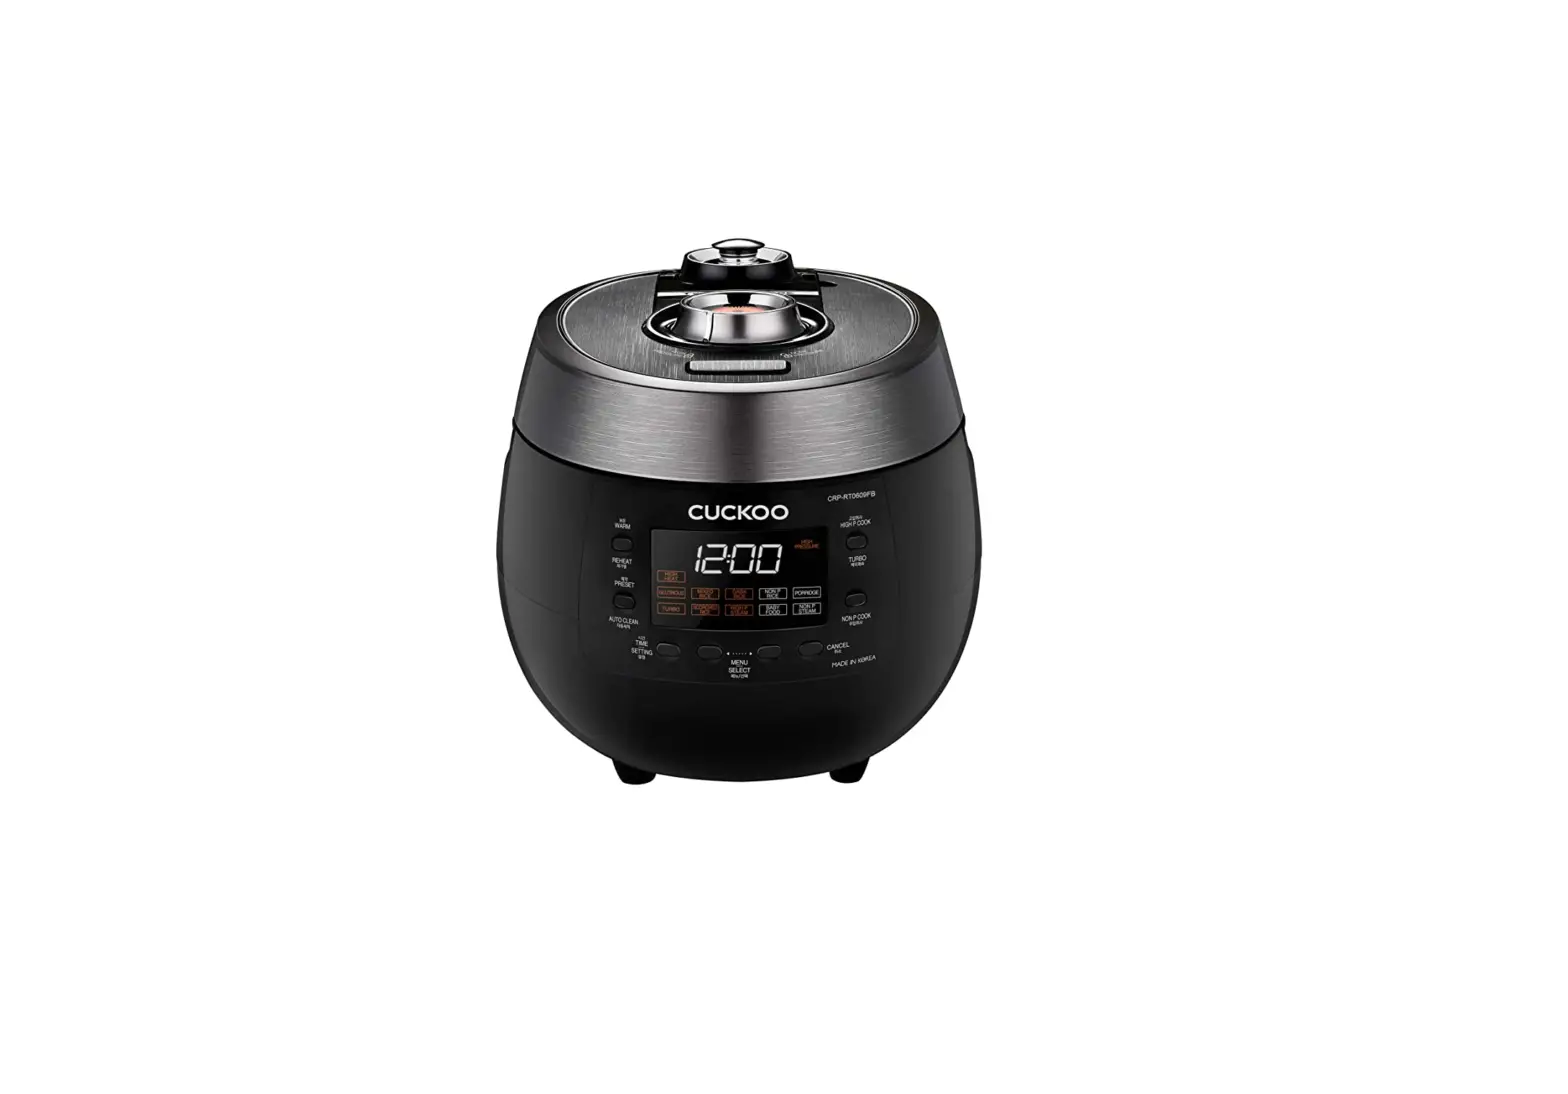 CUCKOO CRP-HS06 Electric Pressure Rice Cooker/Warmer Instruction Manual